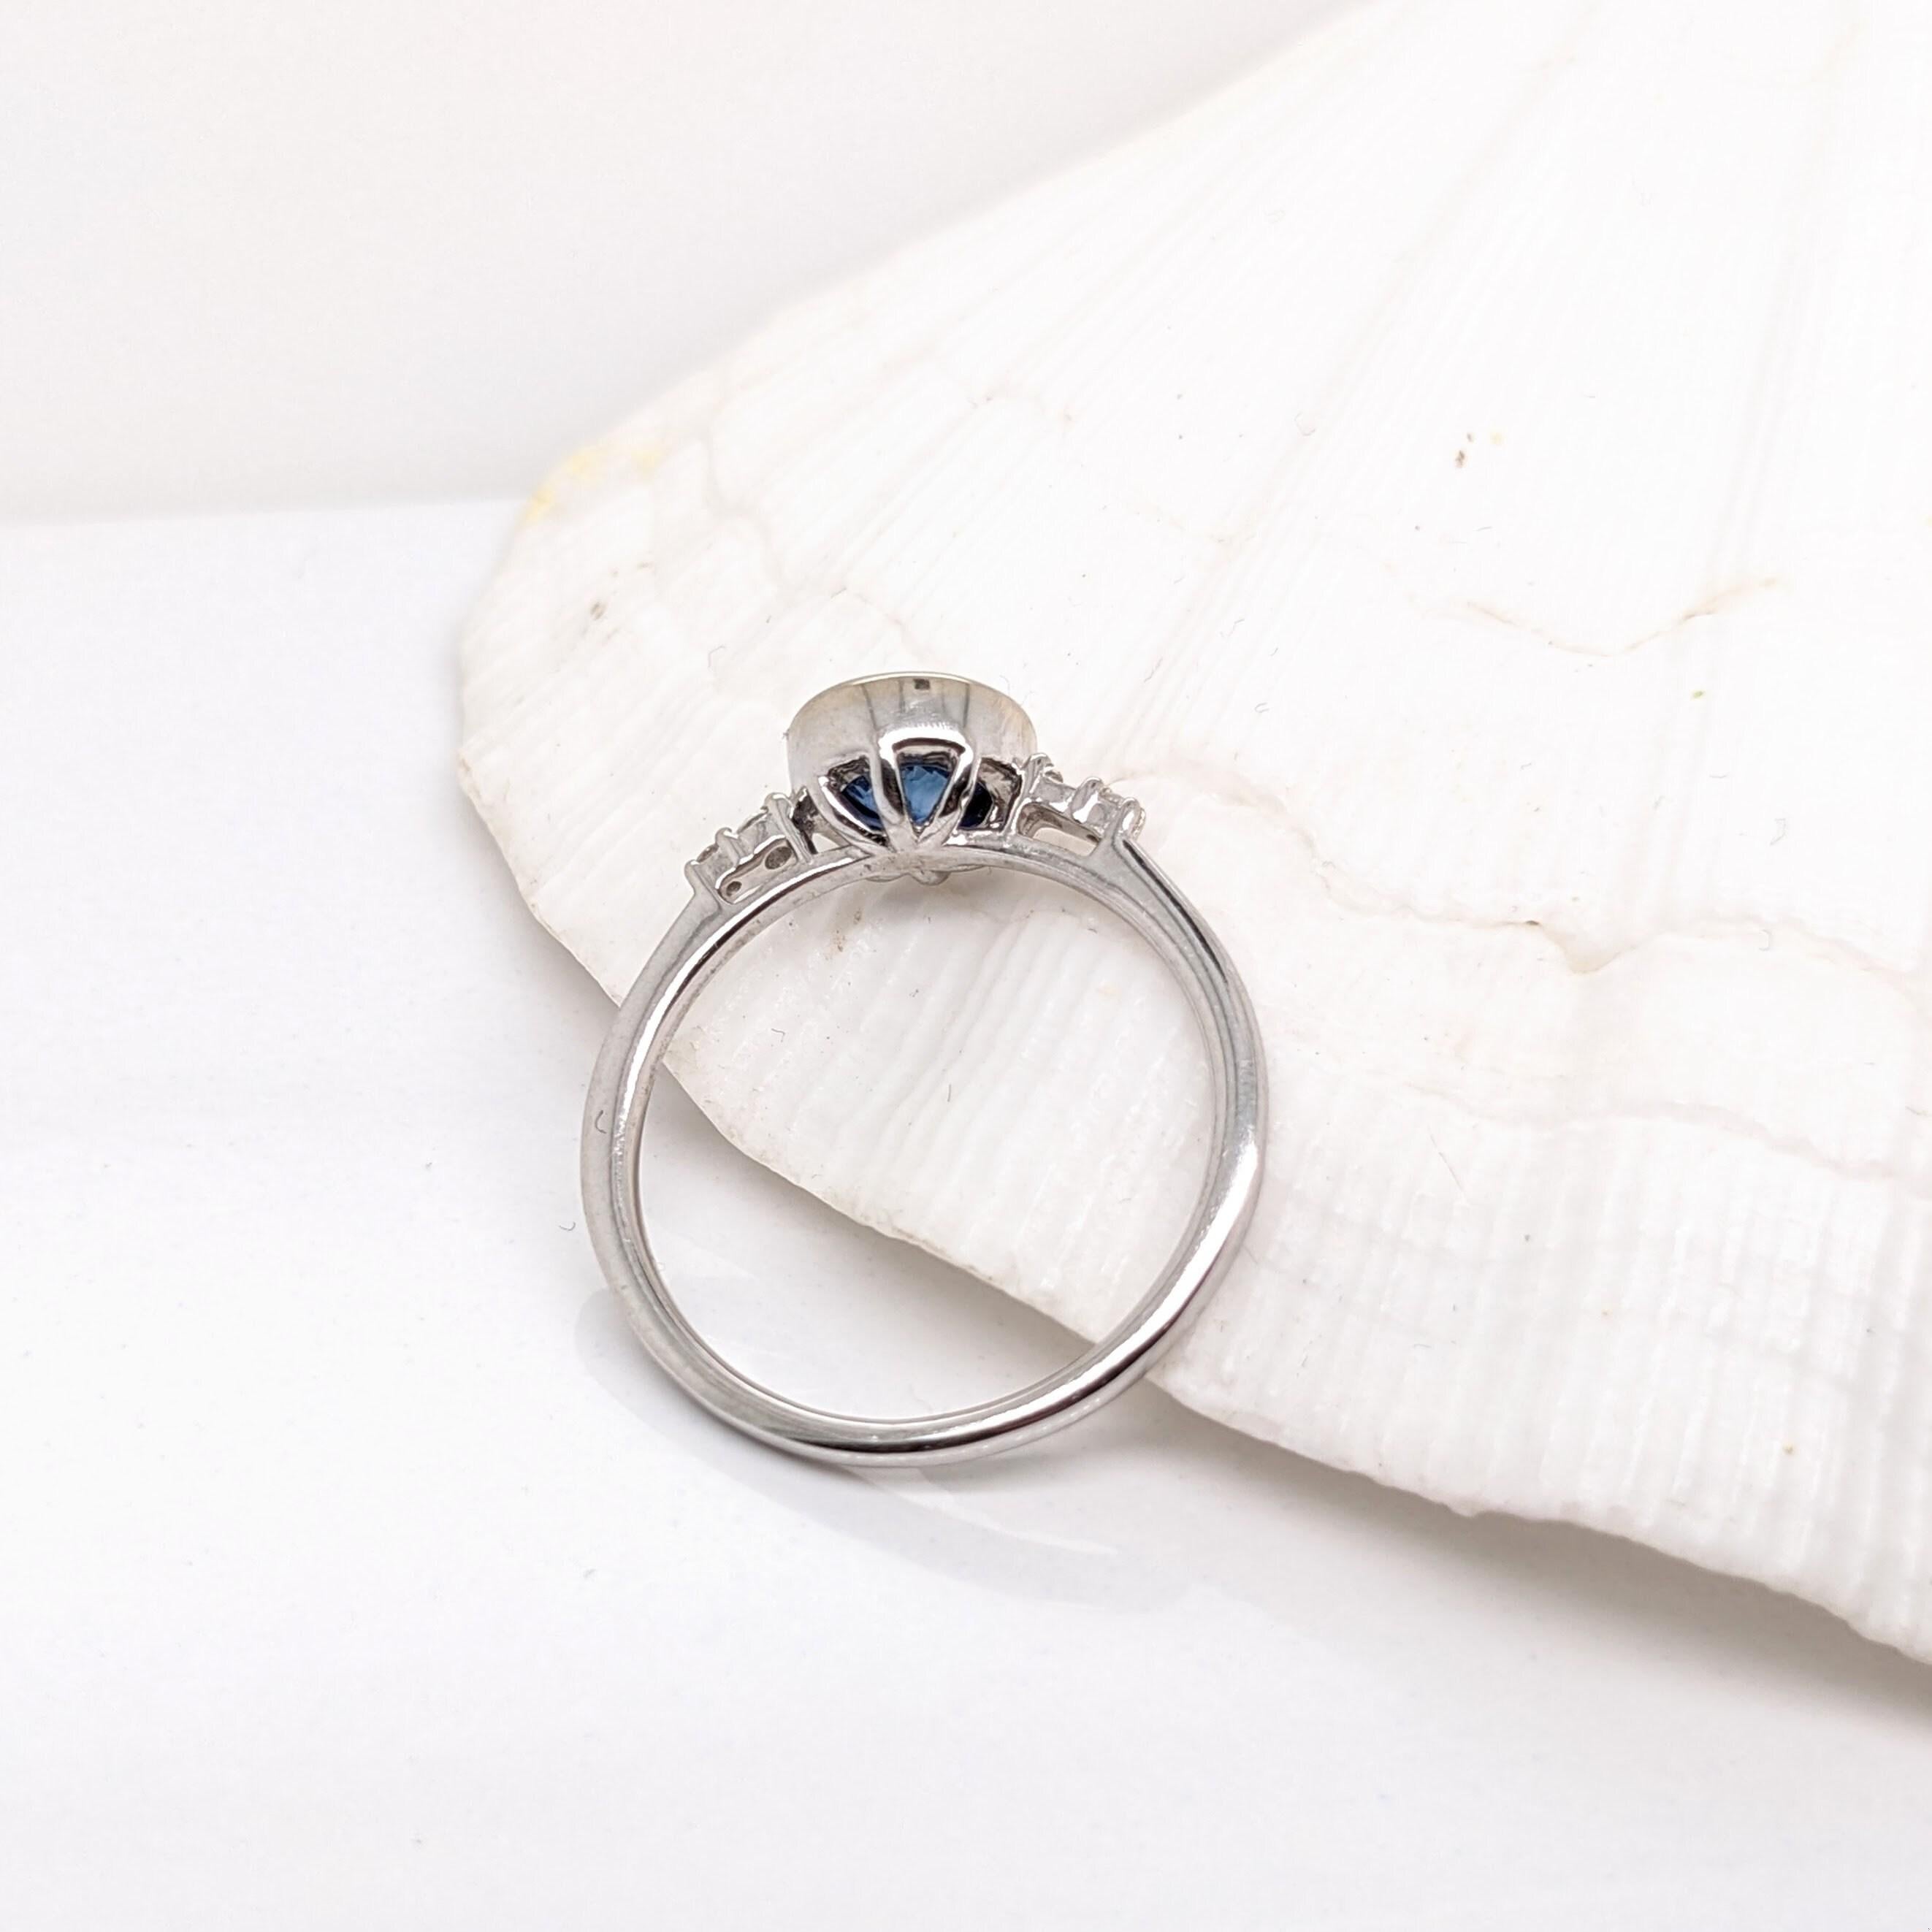 Blue Ceylon Sapphire Ring w Earth Mined Diamonds in Solid 14k Gold Round 6mm